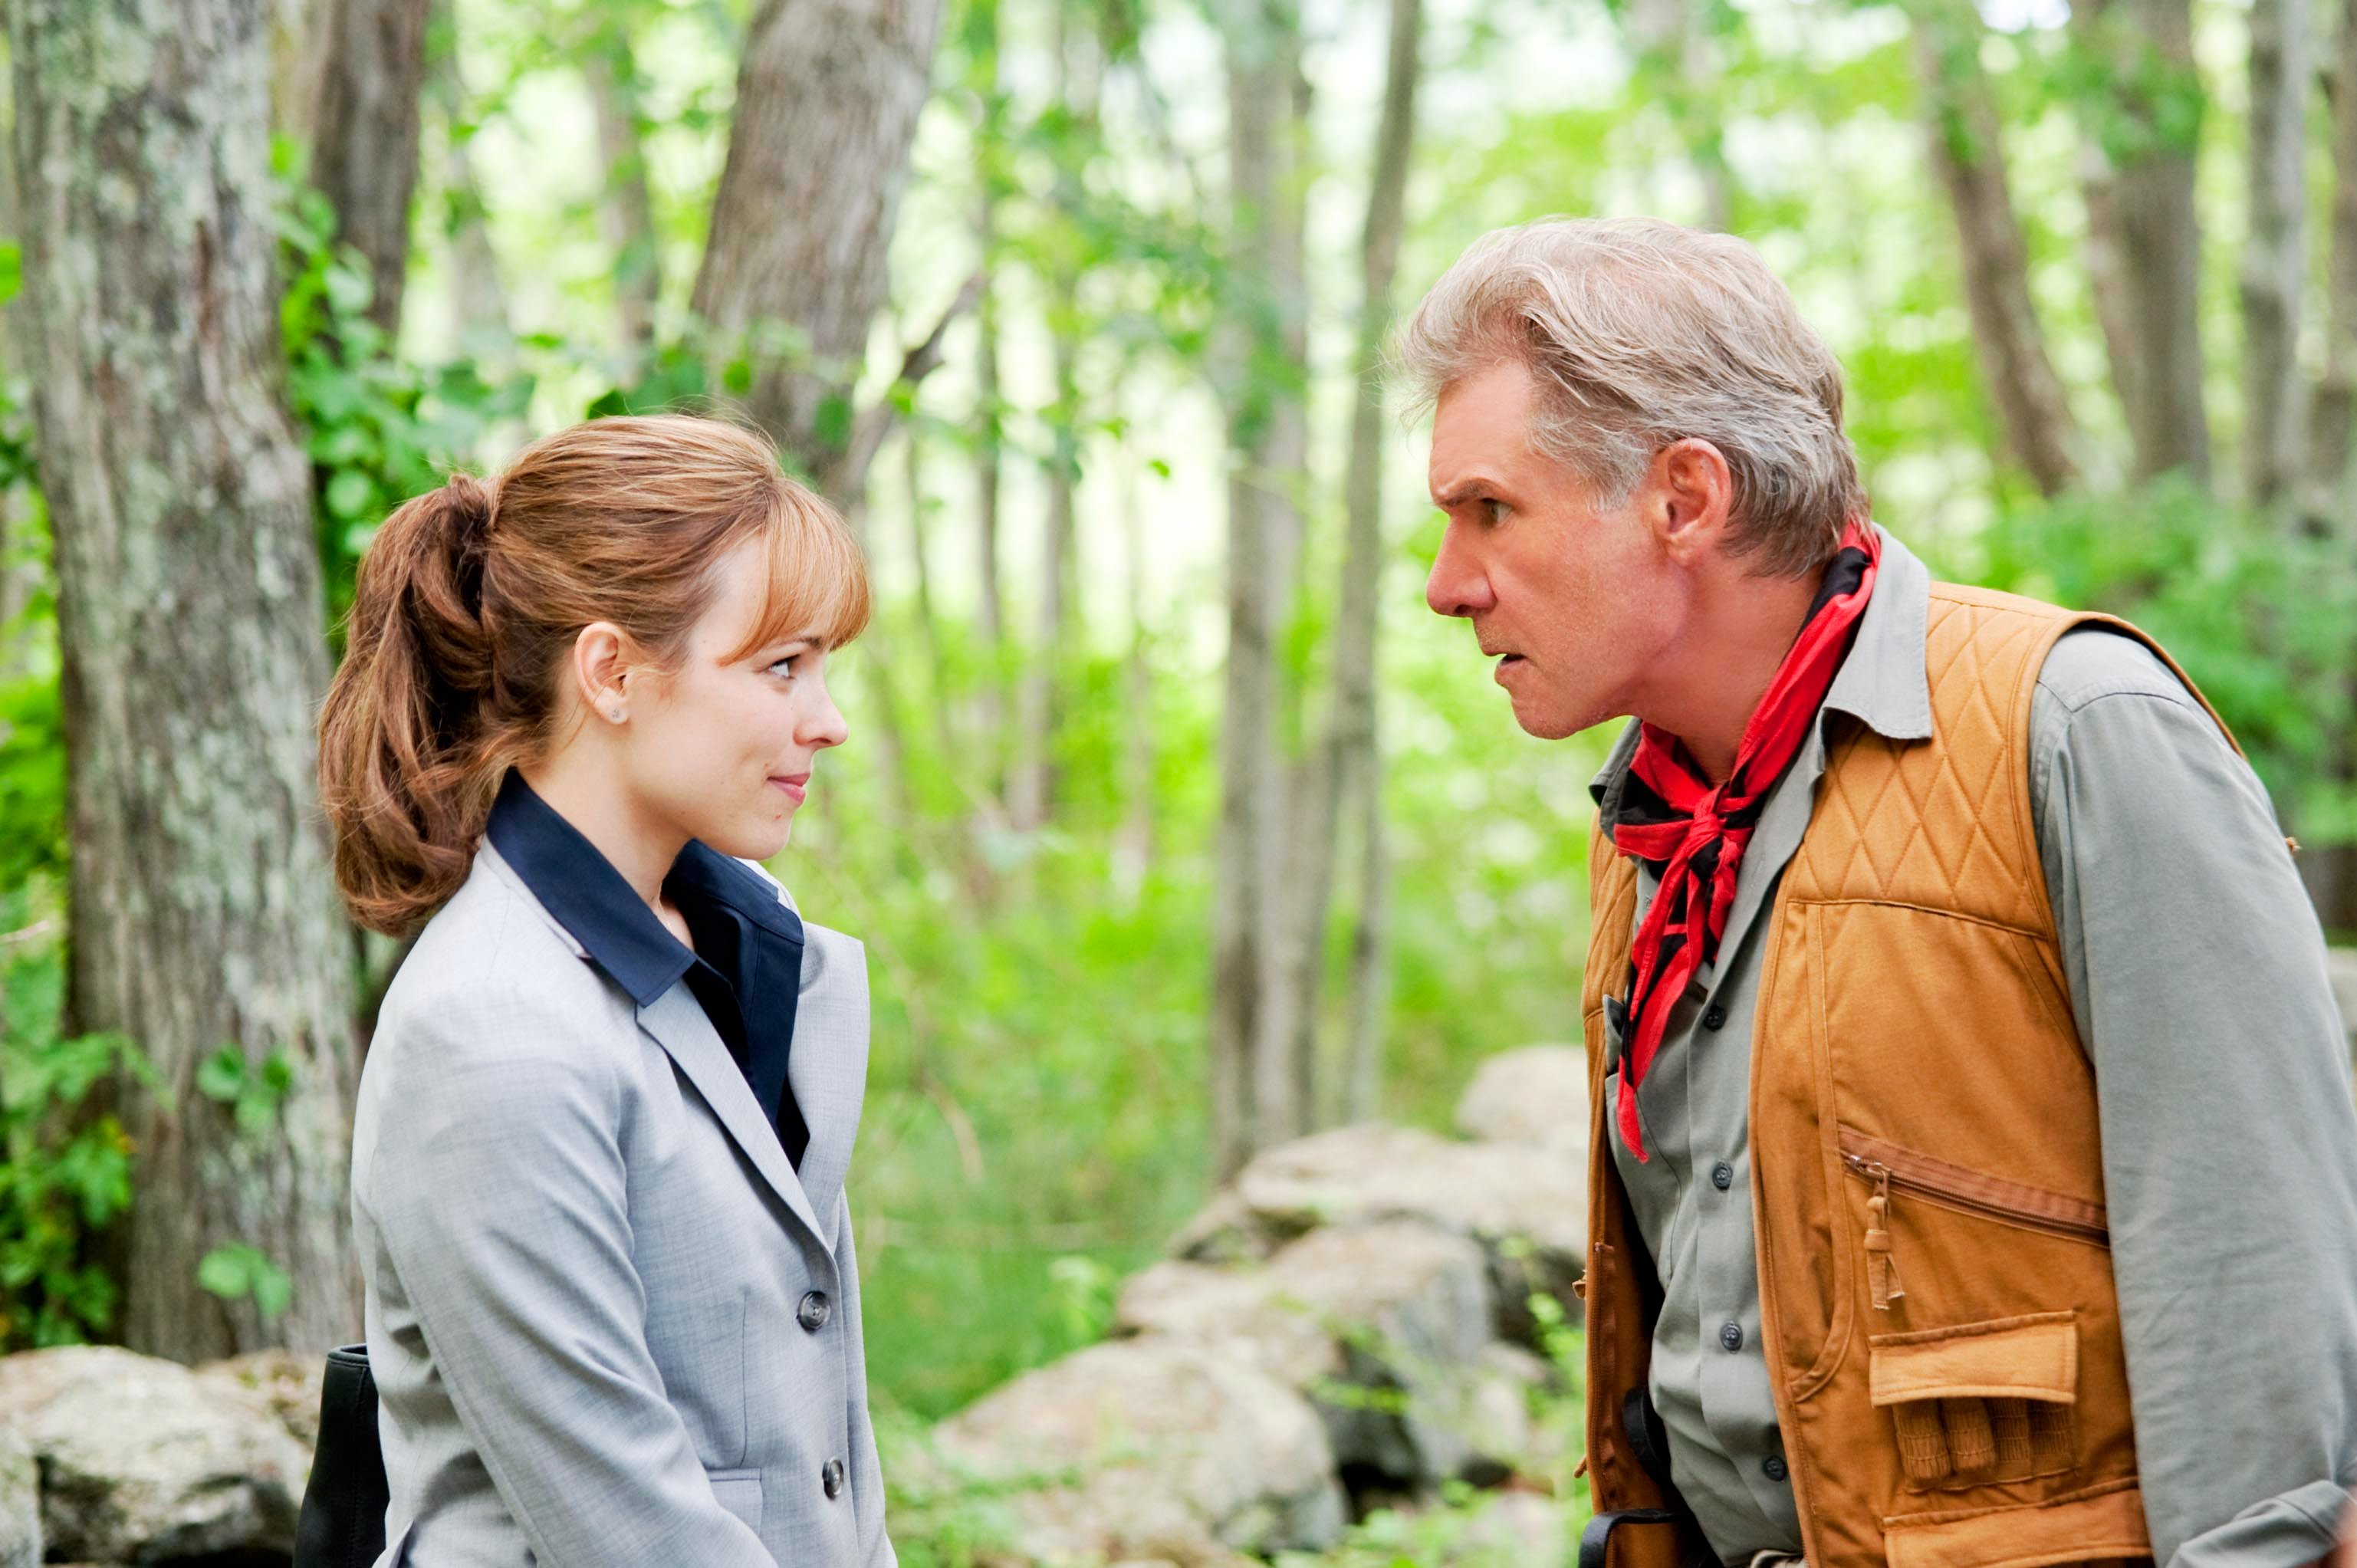 Harrison ford new movie morning glory #2